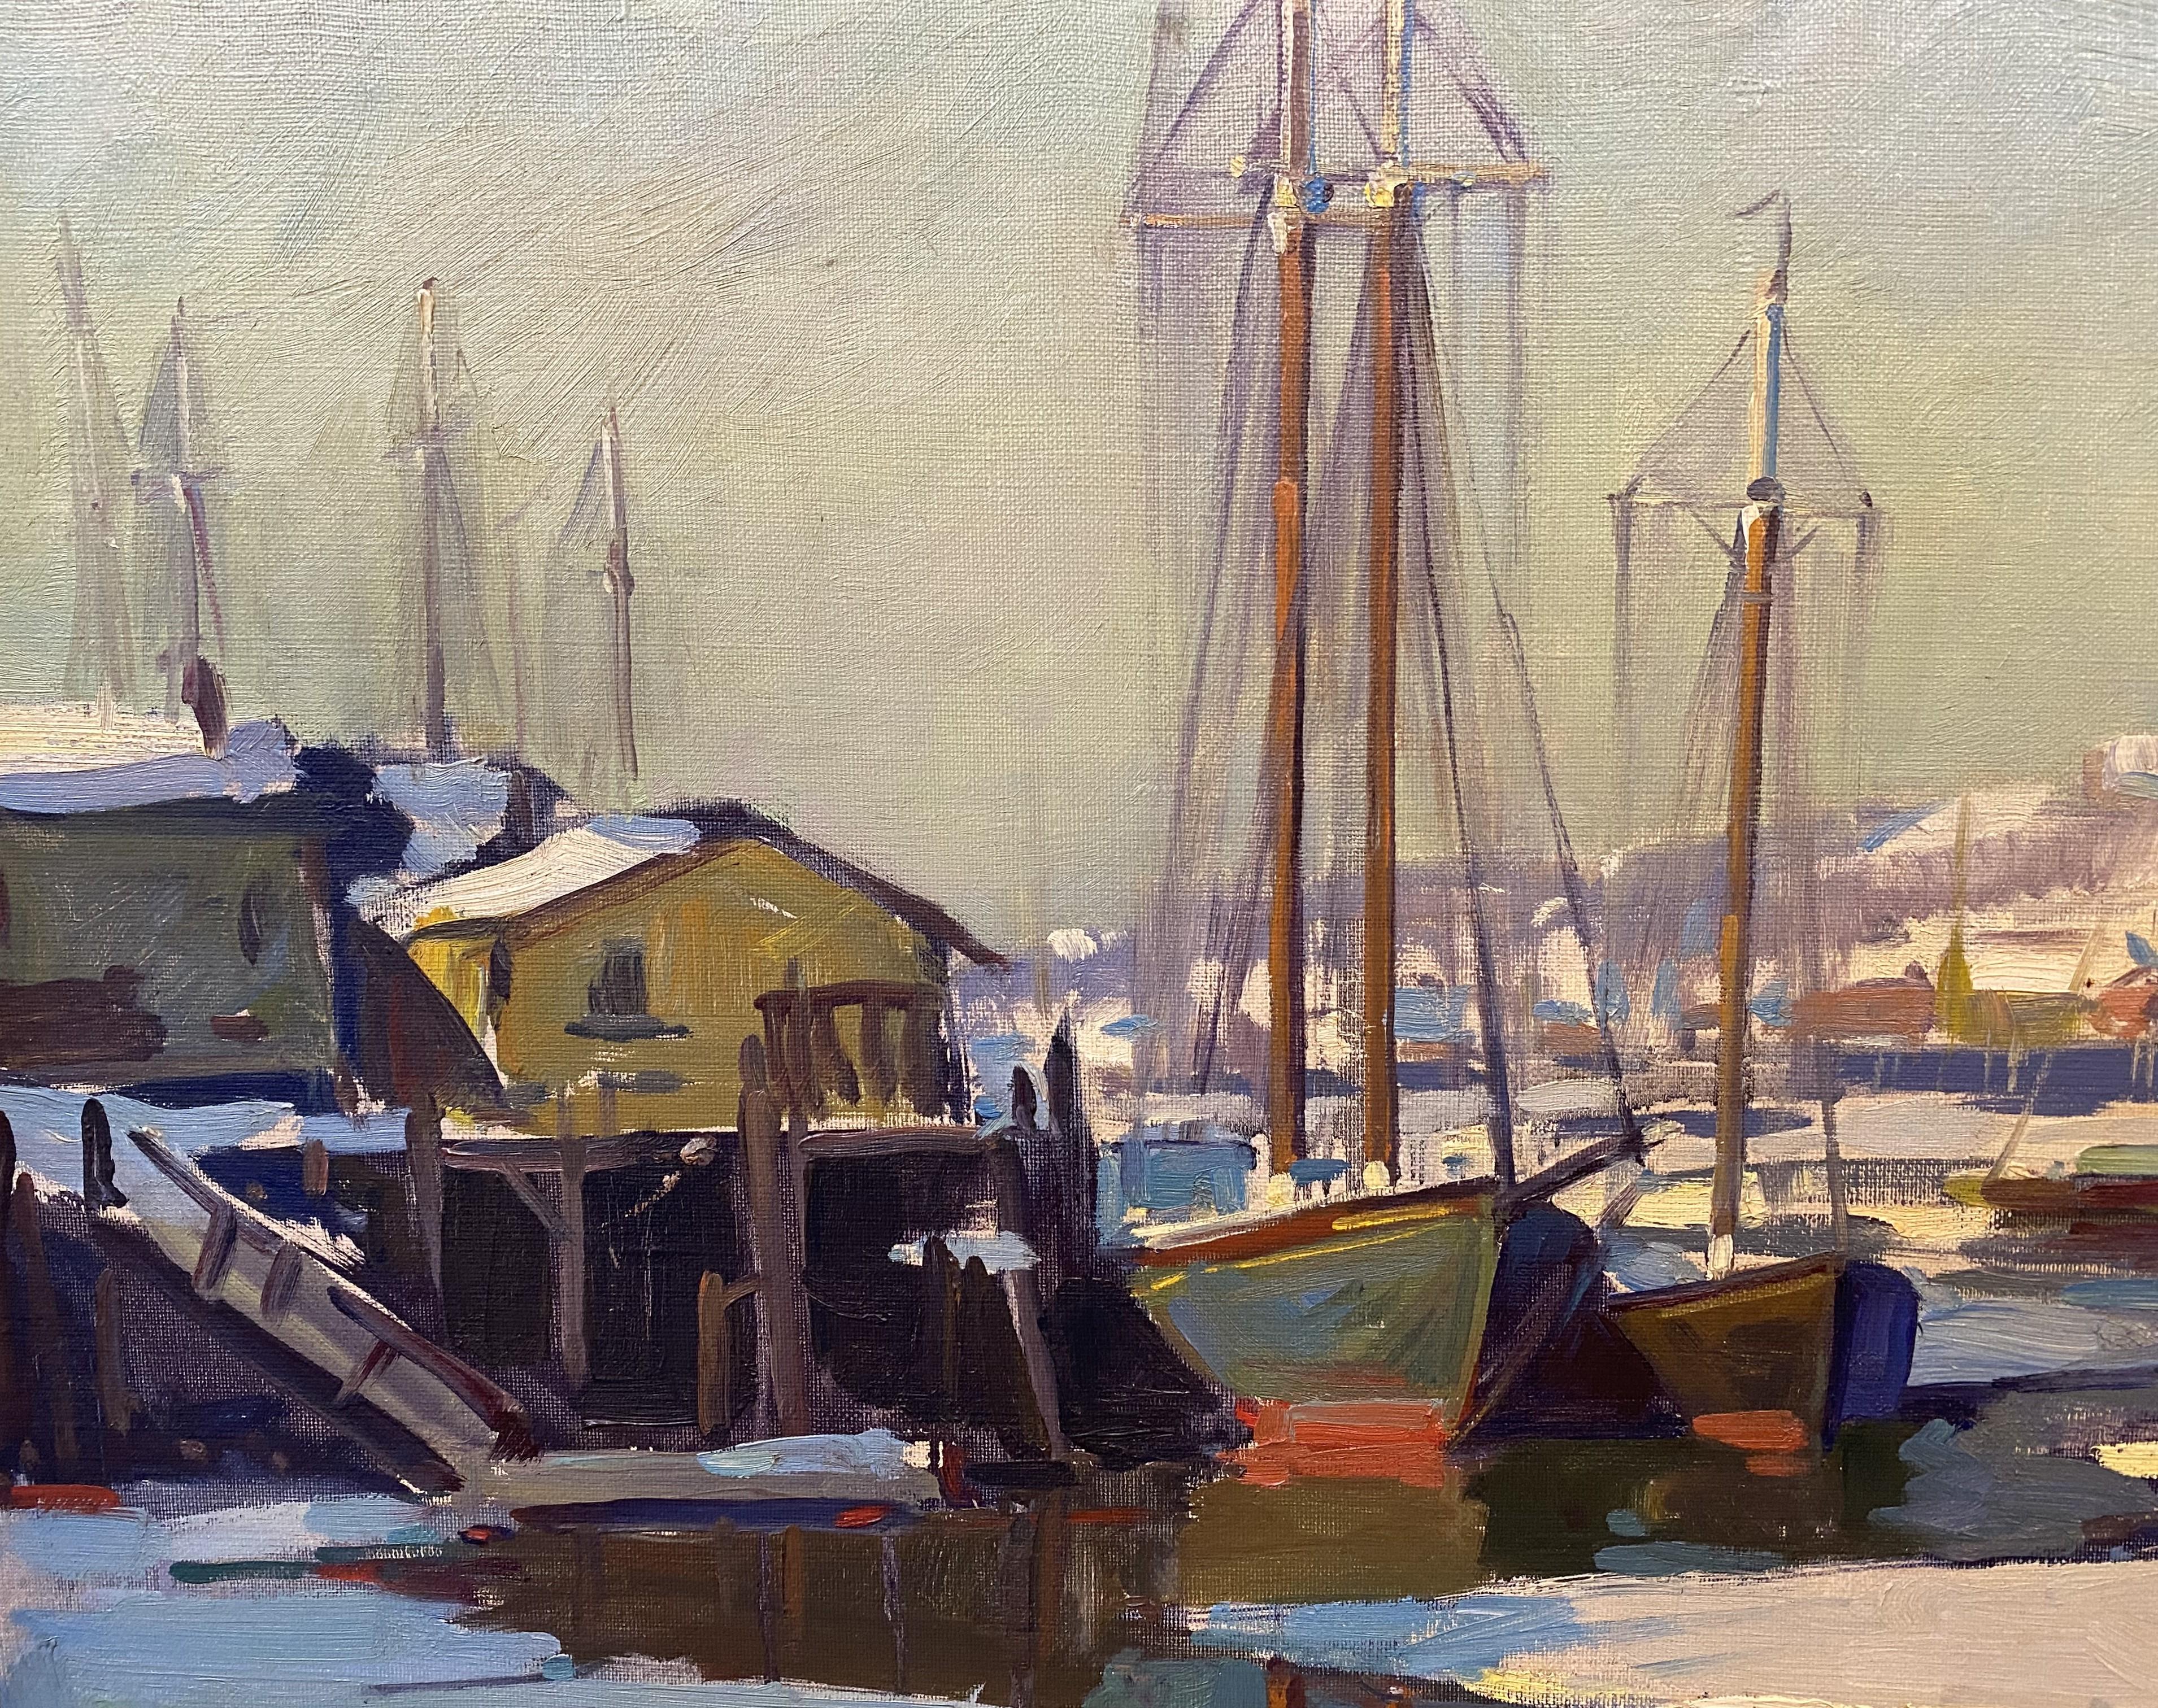 An exceptional winter marine oil painting of Gloucester Harbor with boats on Cape Ann by American artist Emile Albert Gruppe (1896-1978). Gruppé was born in Rochester, NY, and is renowned for his New England landscapes and vigorous portrayals of the